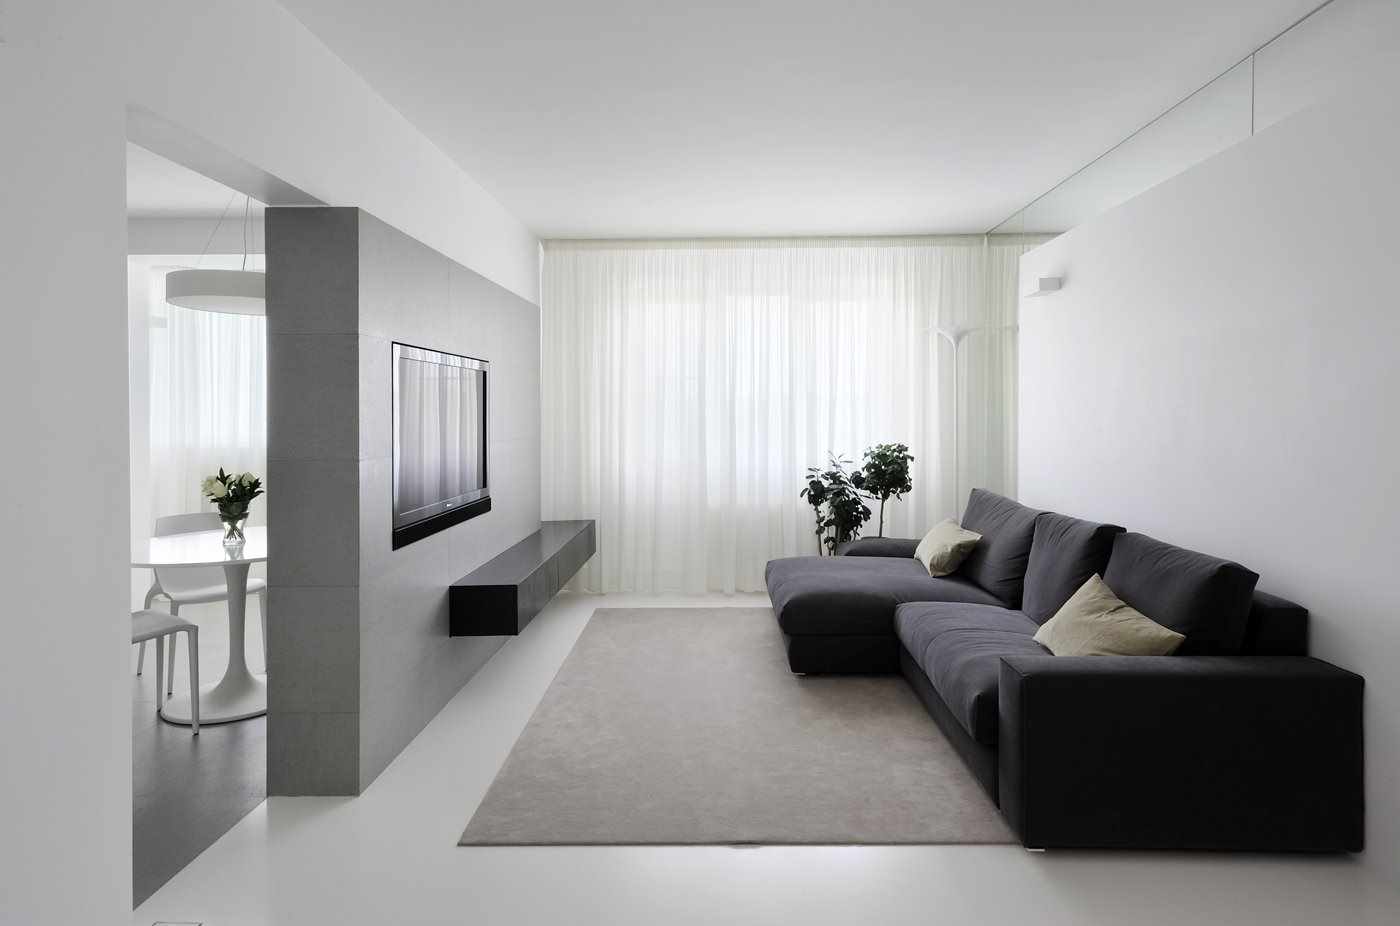 the idea of ​​using a light decor of a living room in a minimalist style